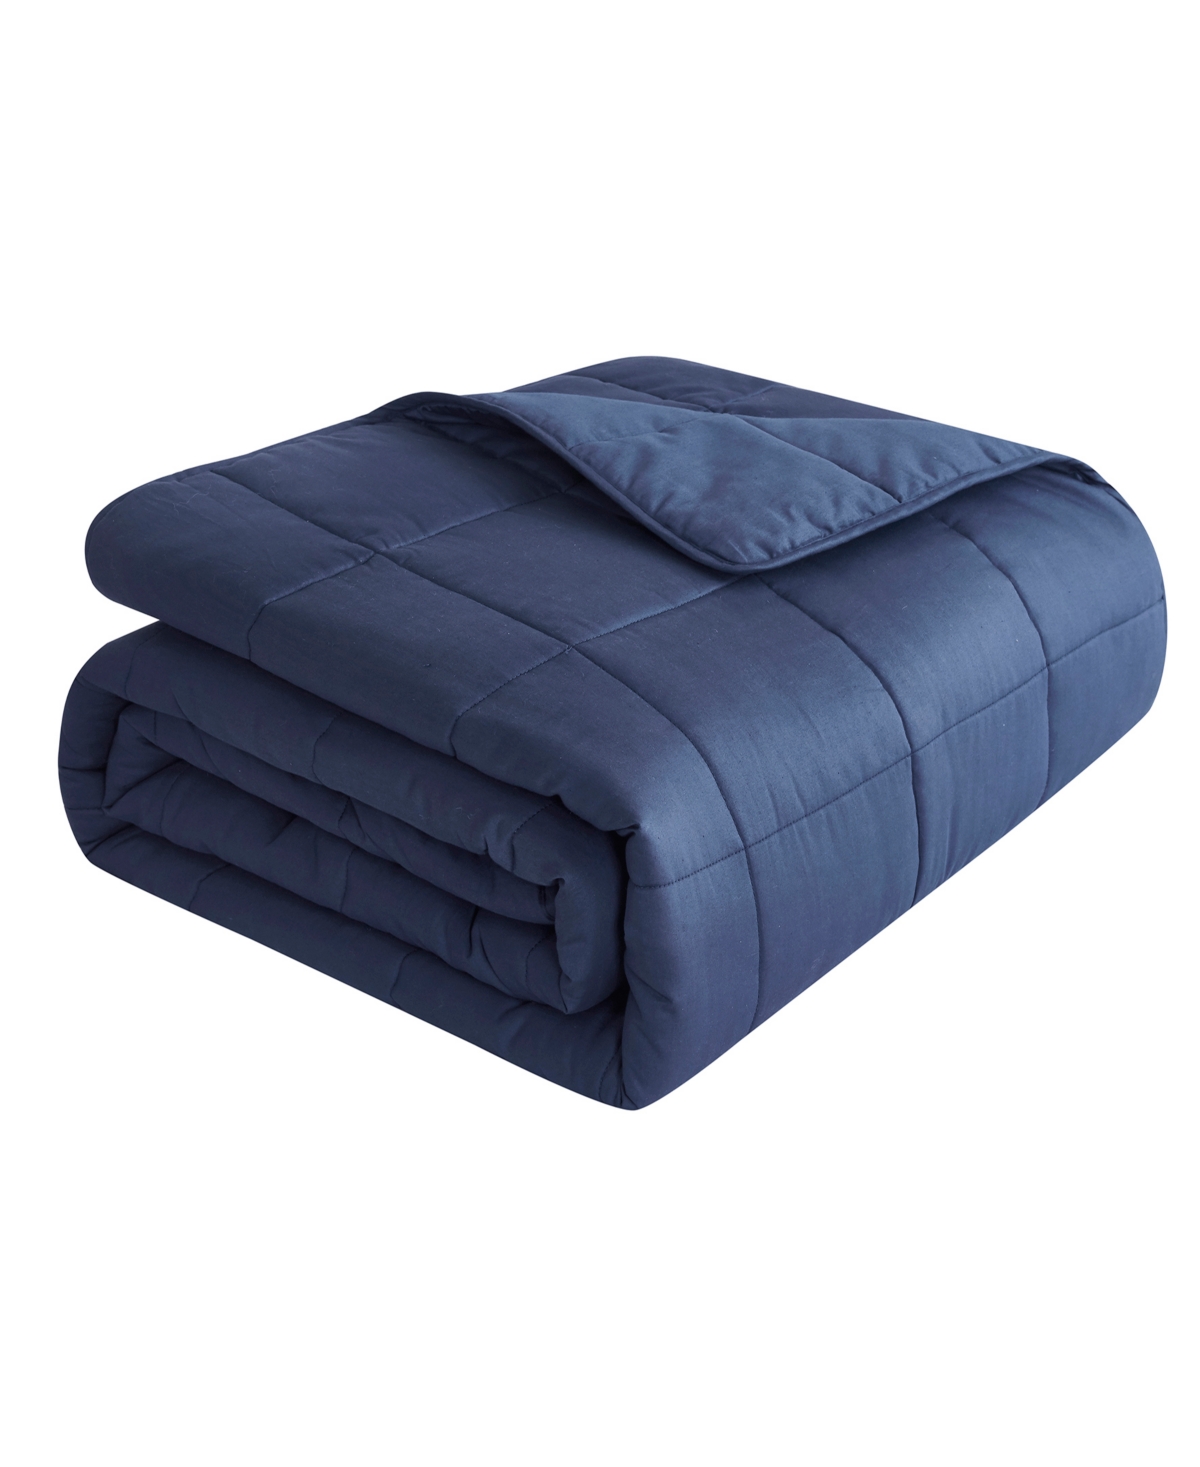 Dream Theory Cotton Weighted 20 Lbs Blanket, King Bedding In Navy